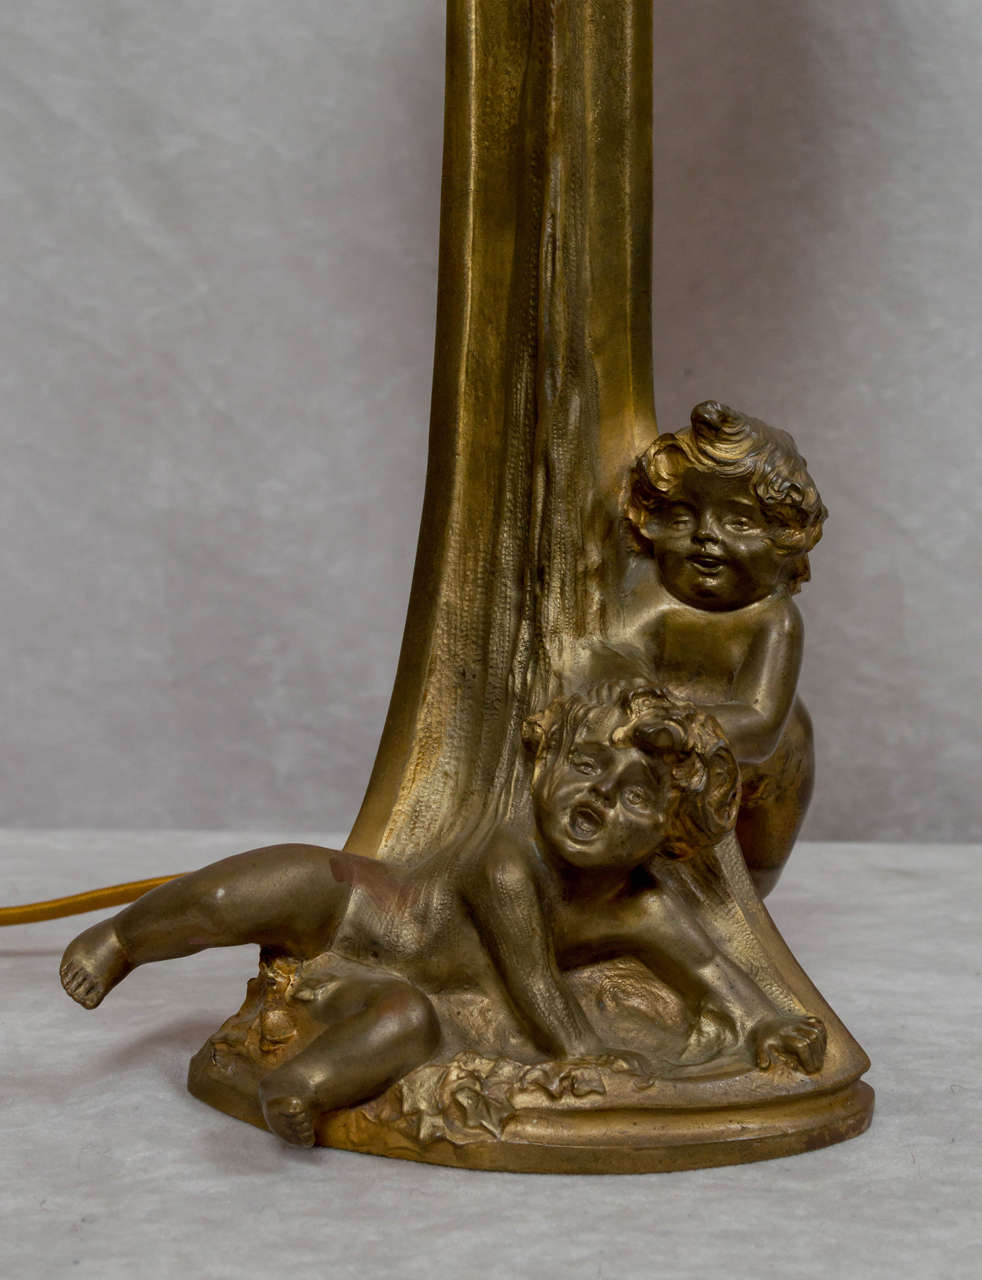 20th Century Whimsical French Art Nouveau Figural Lamp with Children, Louchet Foundry